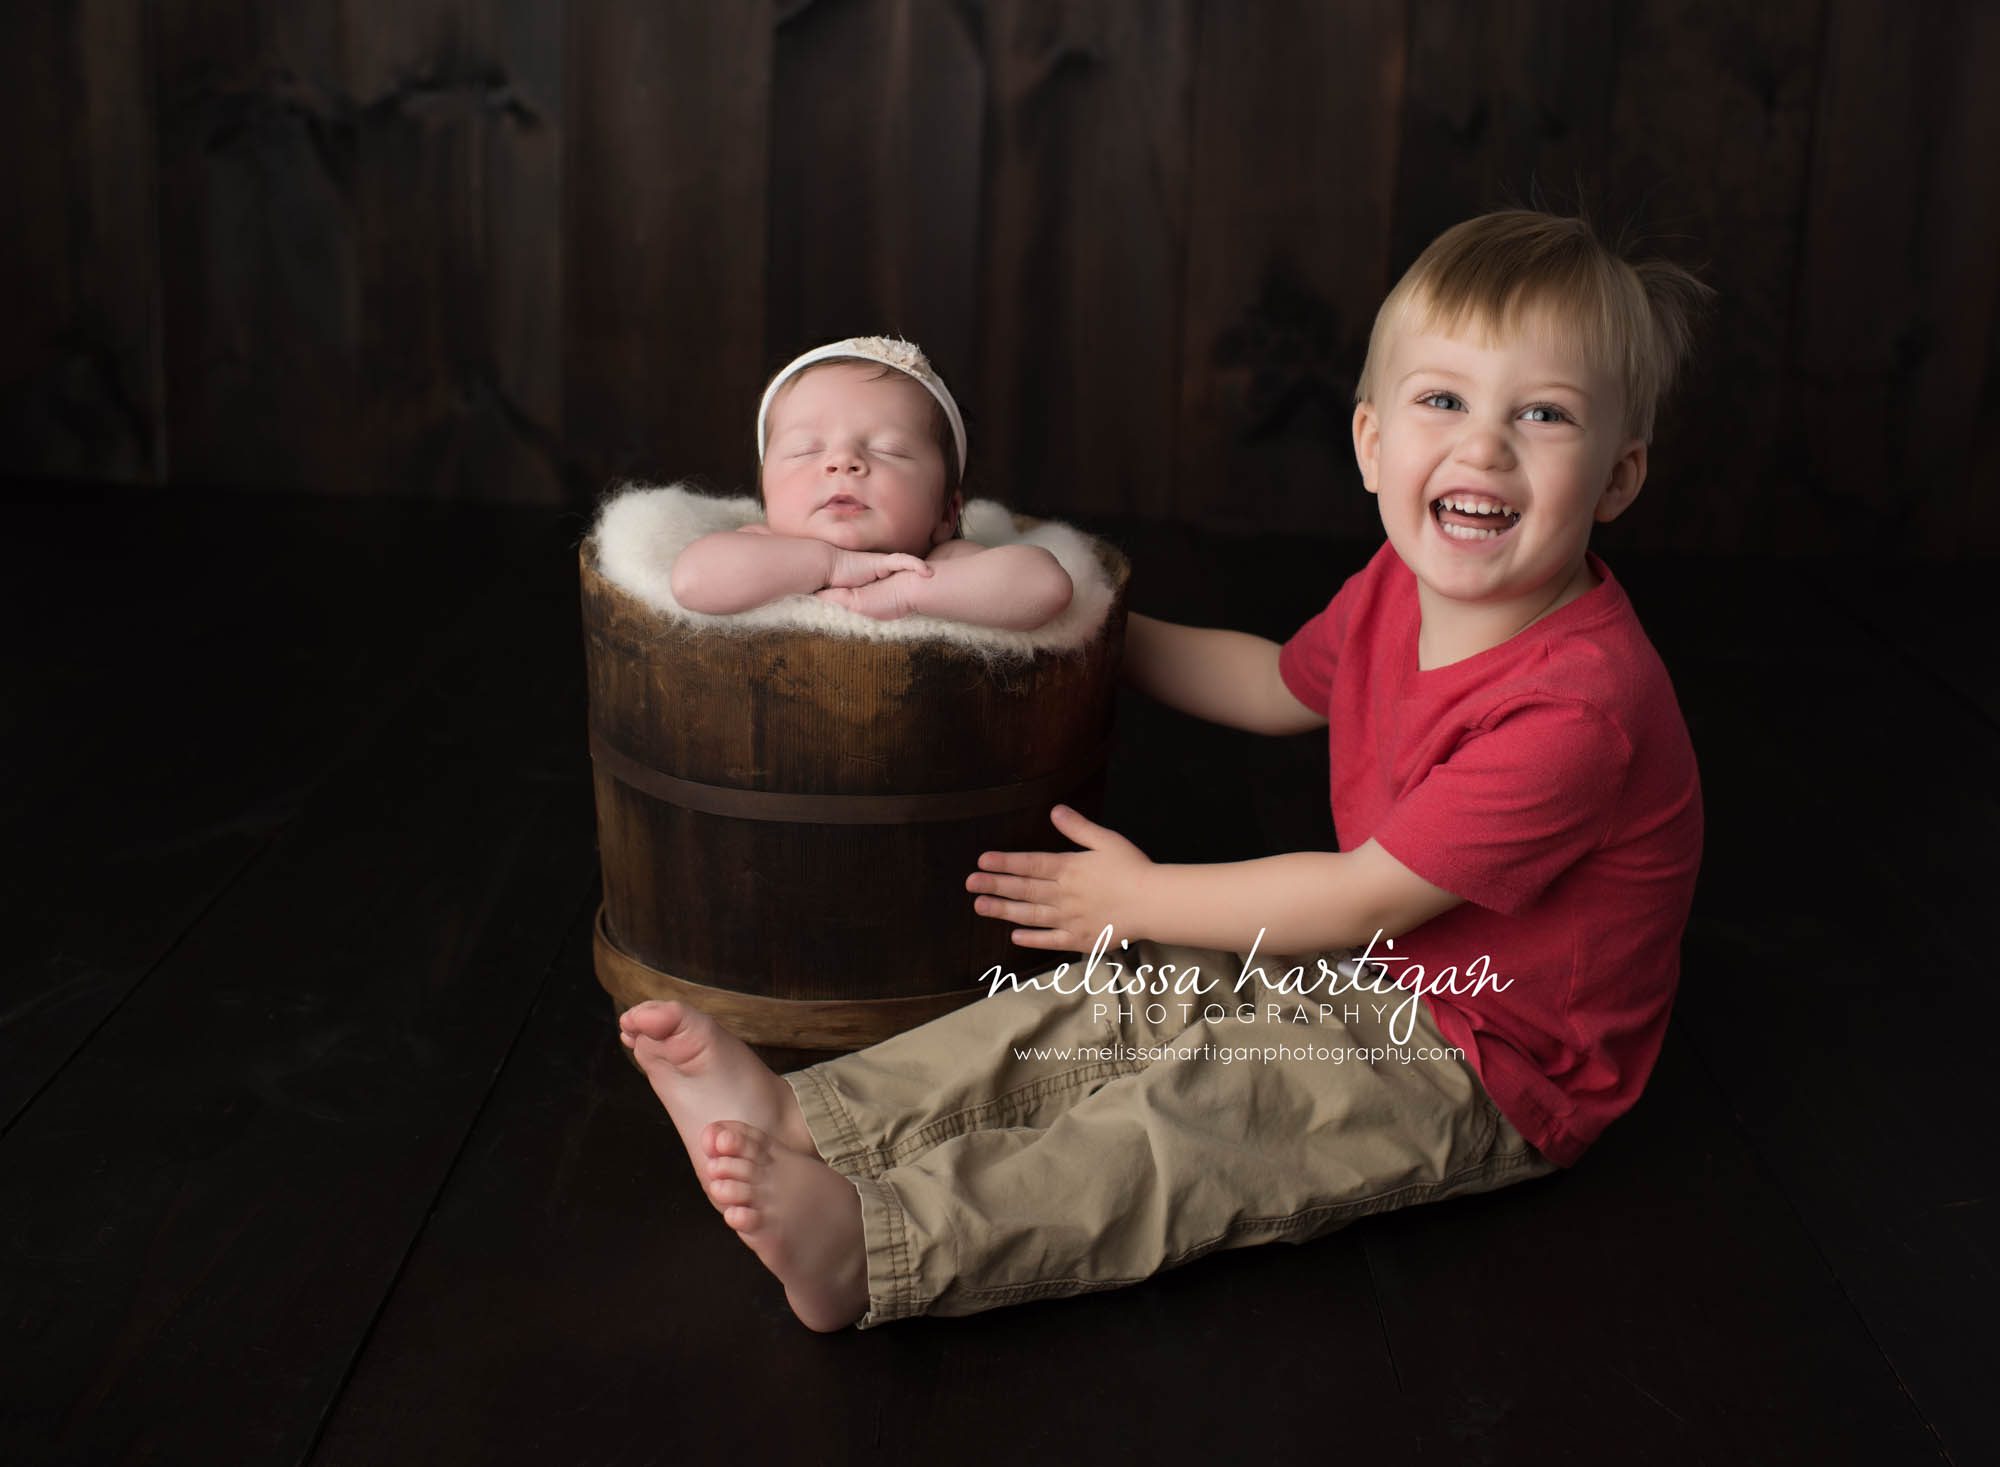 Melissa Hartigan Photography Connecticut Newborn Photographer Coventry Ct Middlefield CT baby Fairfield county Newborn and maternity CT photographer Baby girl white headband in wooden bucket posed with big brother smiling